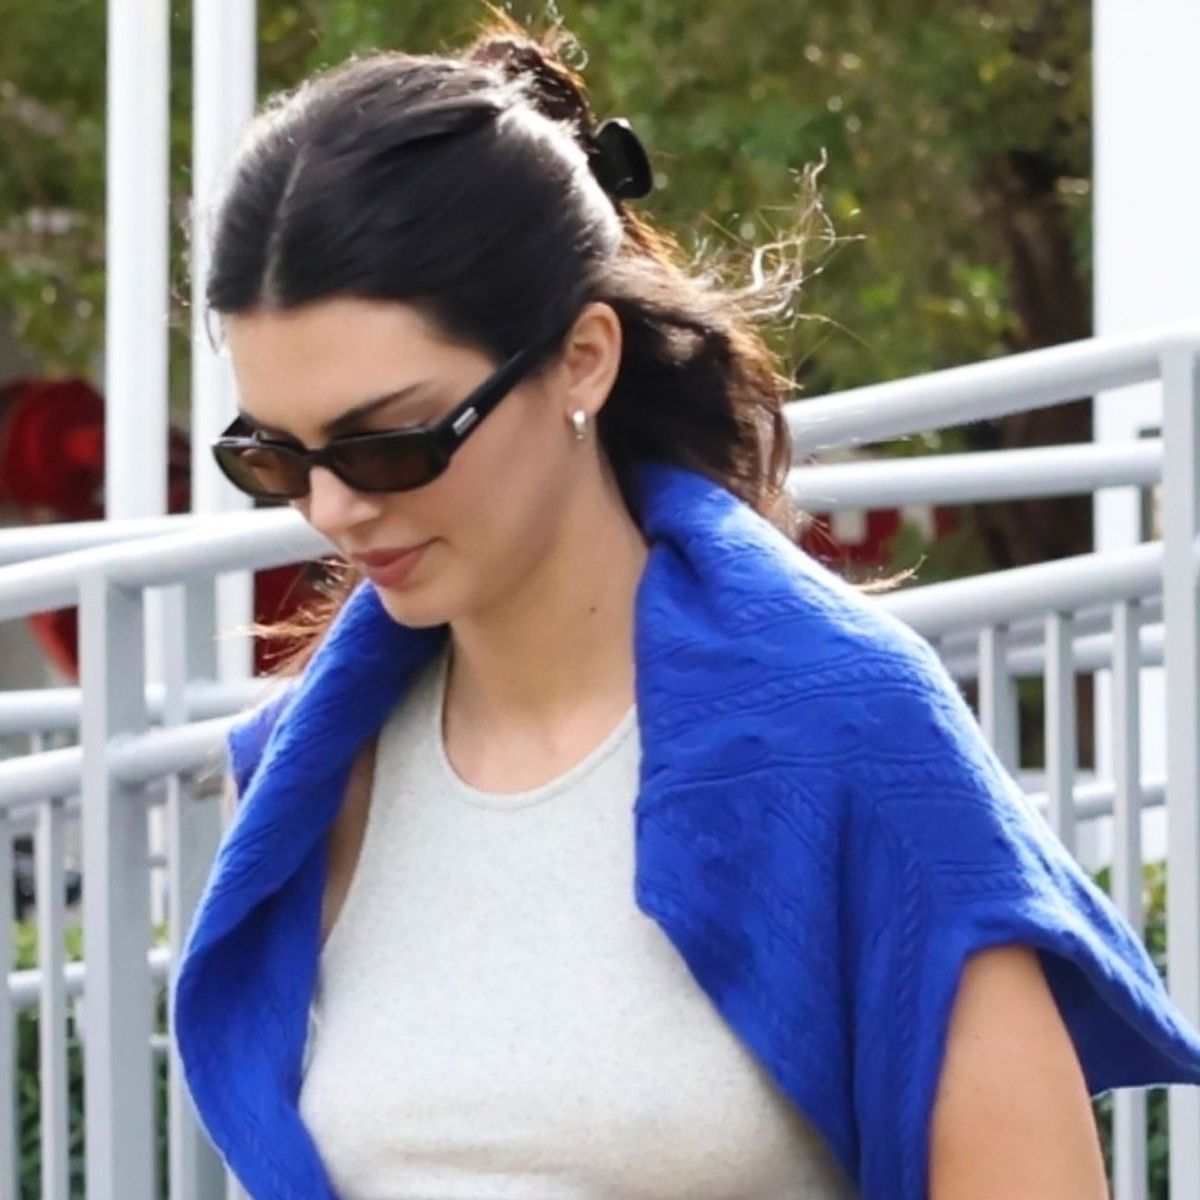 Kendall Jenner Just Wore This $35 Top With Jeans